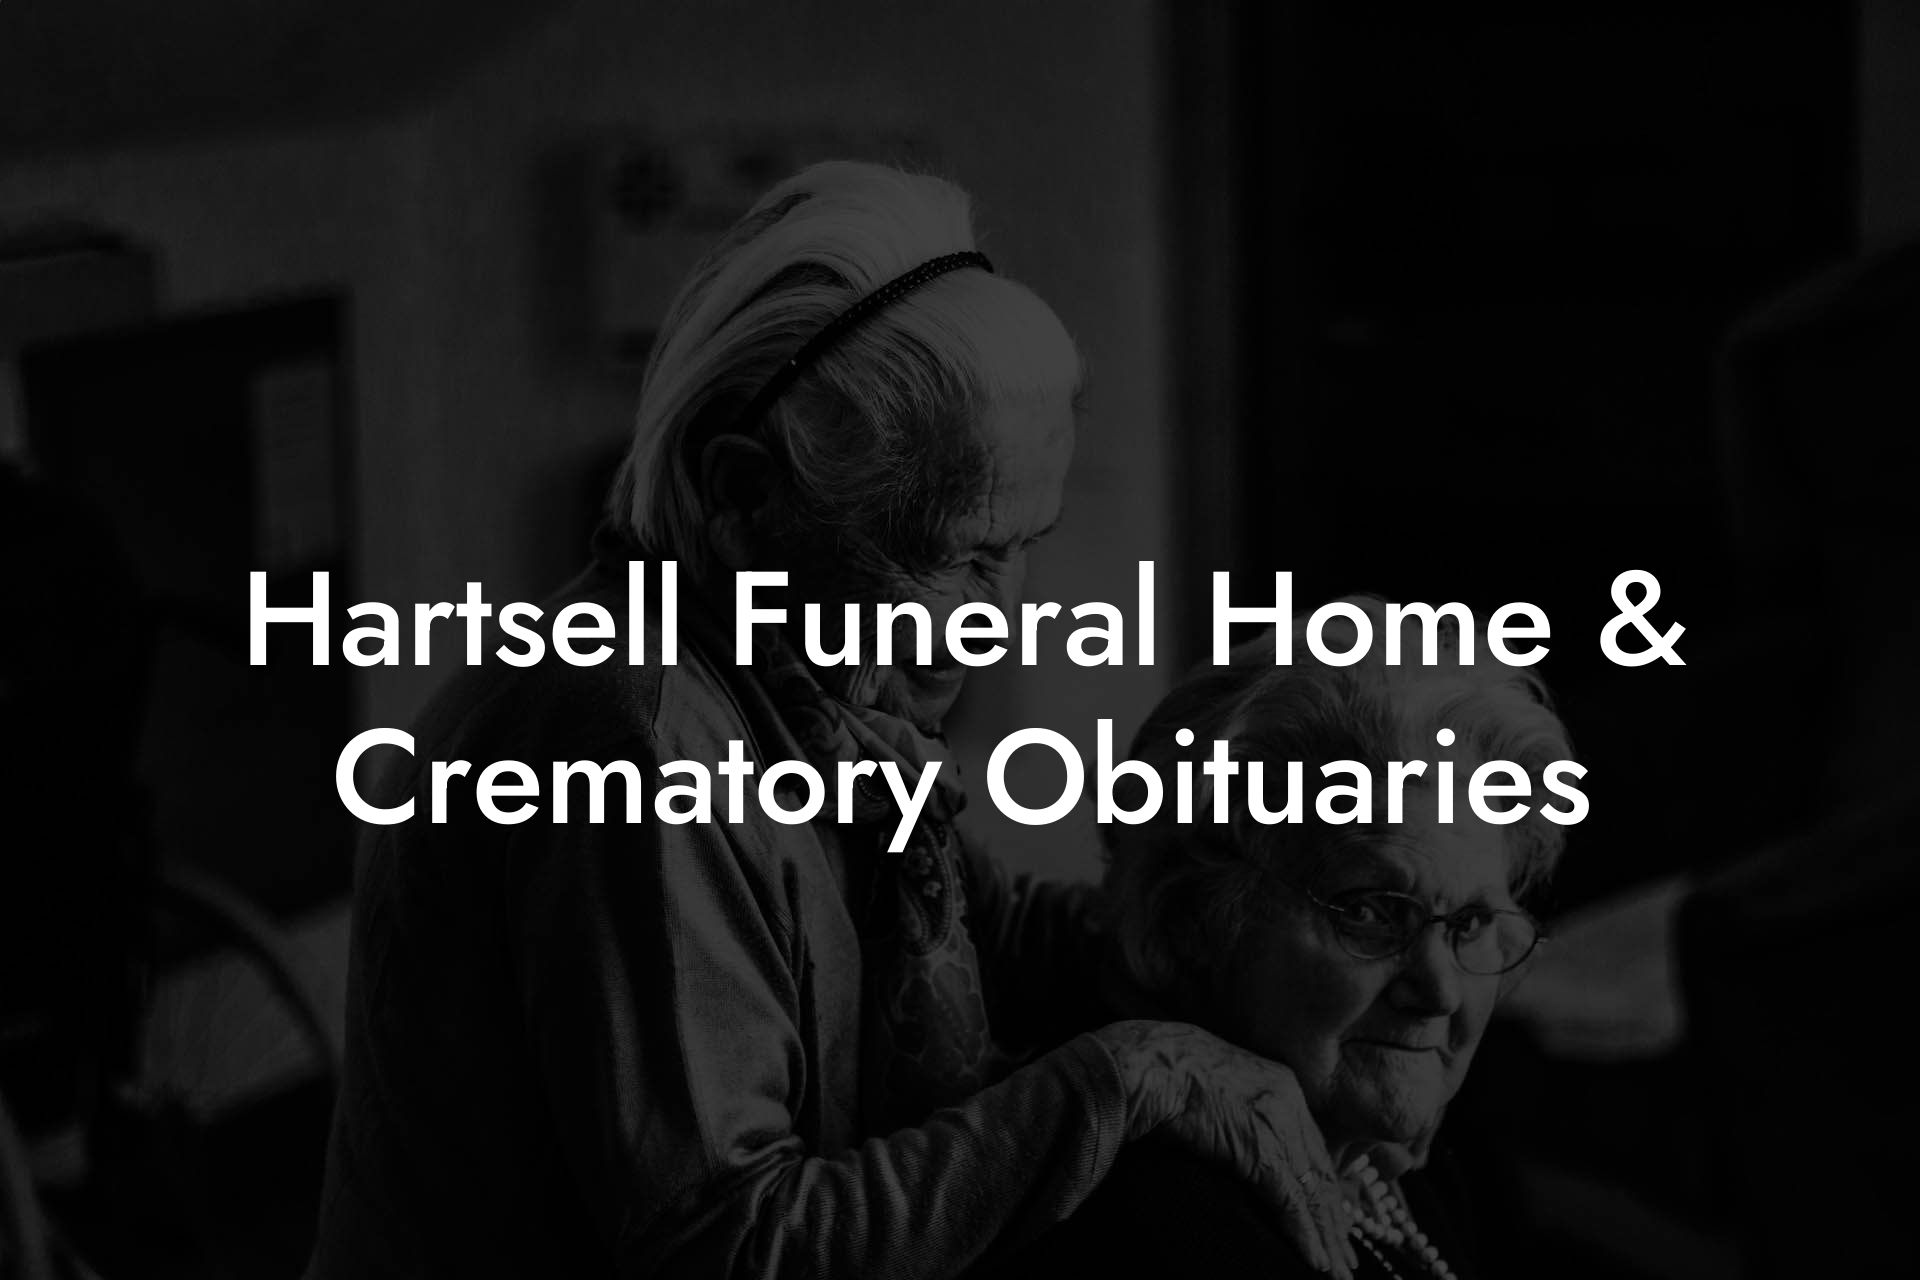 Hartsell Funeral Home & Crematory Obituaries